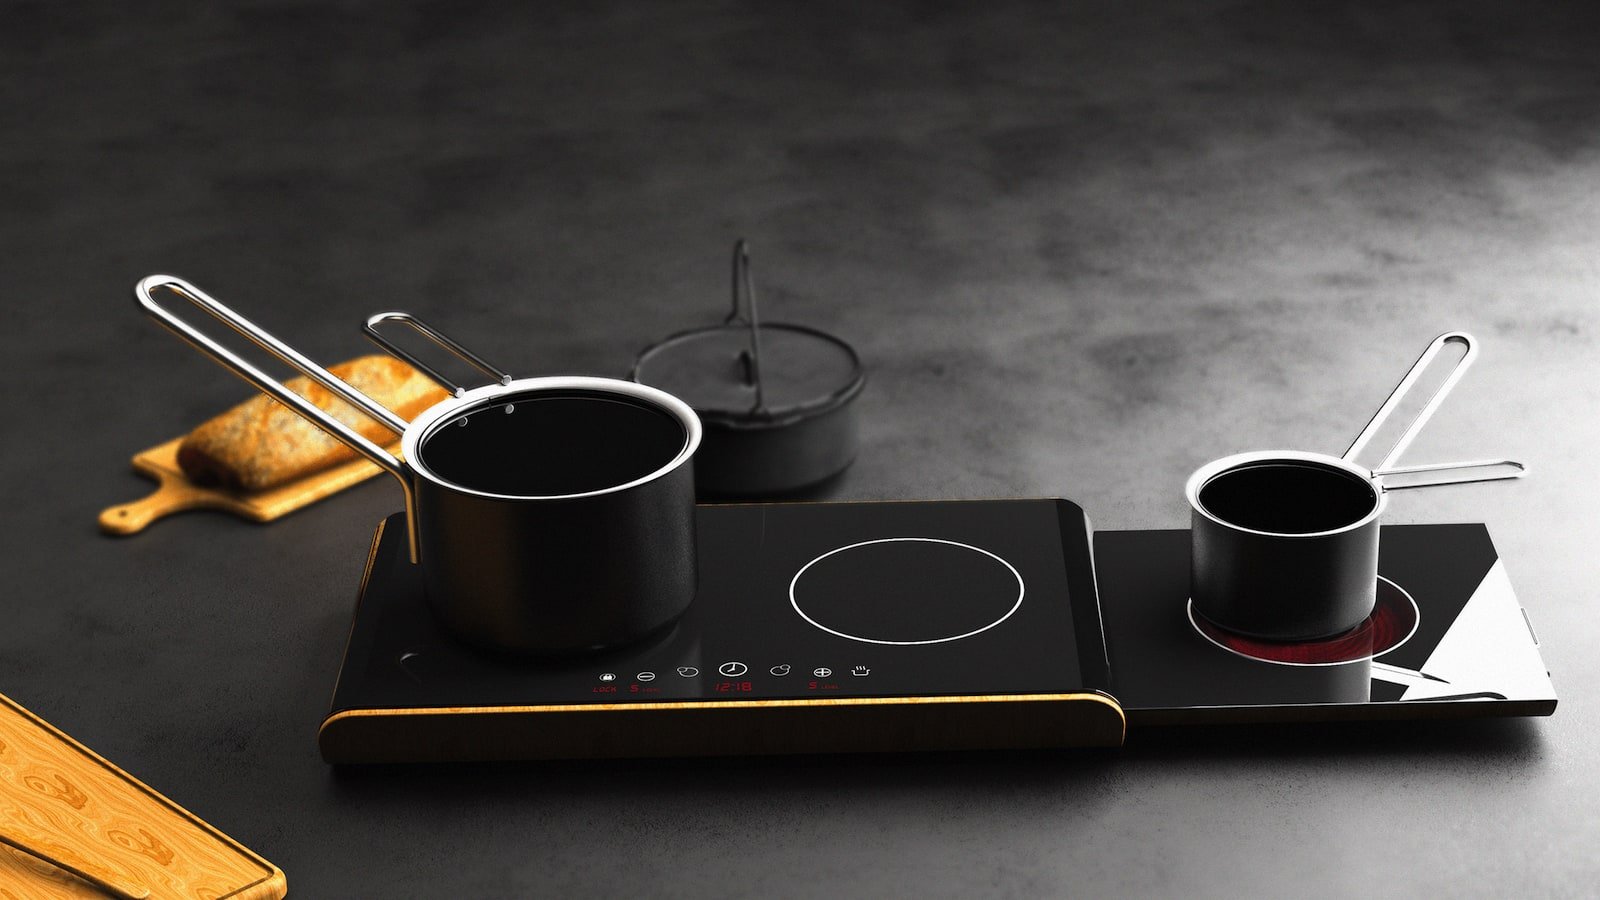 Fortido induction cooker features a lower-level cooktop that slides out like a drawer